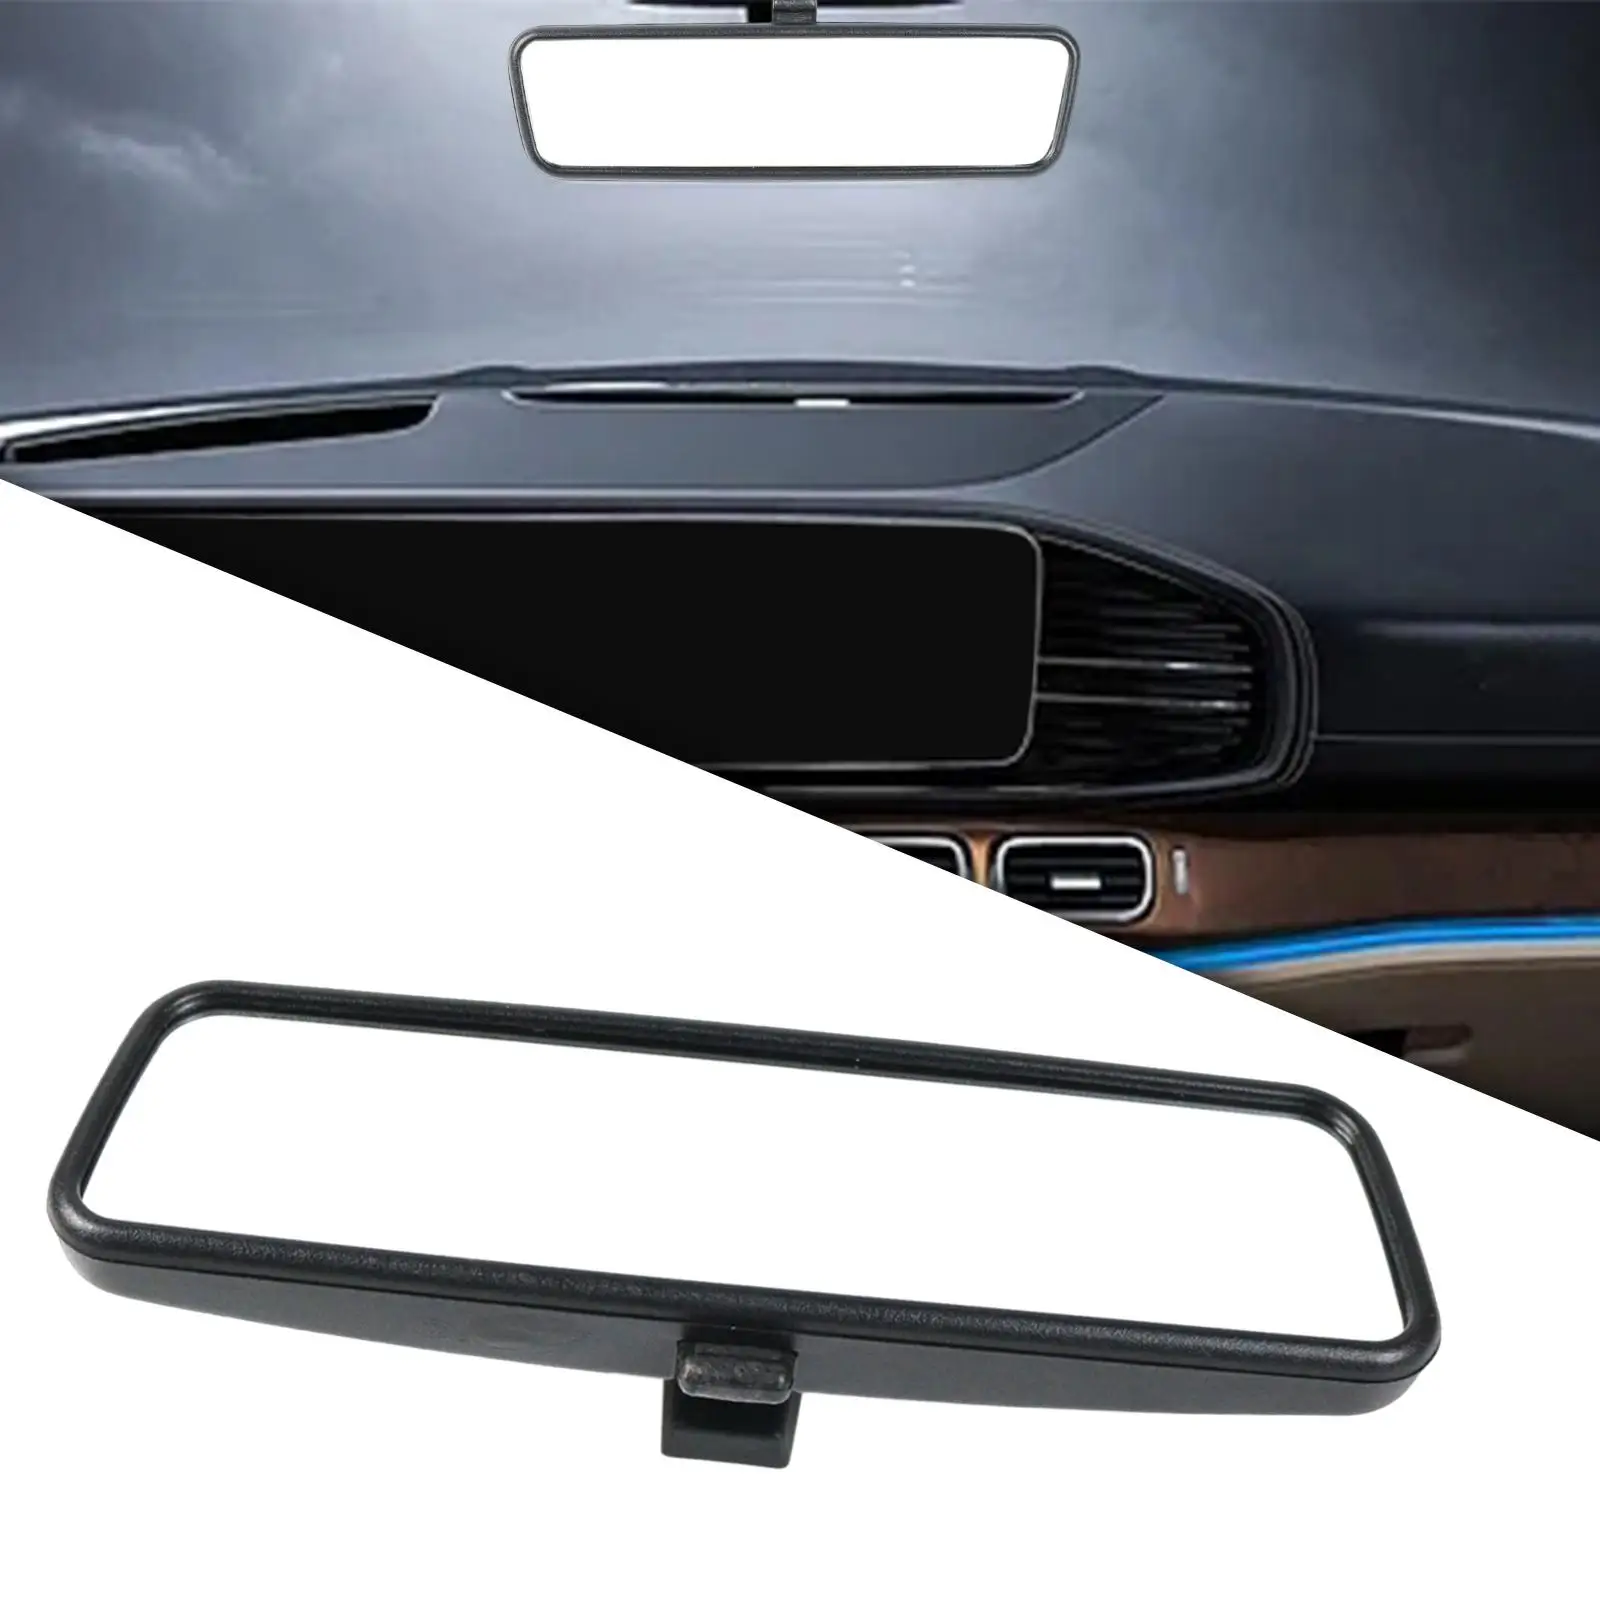 Interior Rear View Mirror 814842 Rearview Mirror for Citroen C1 Replaces